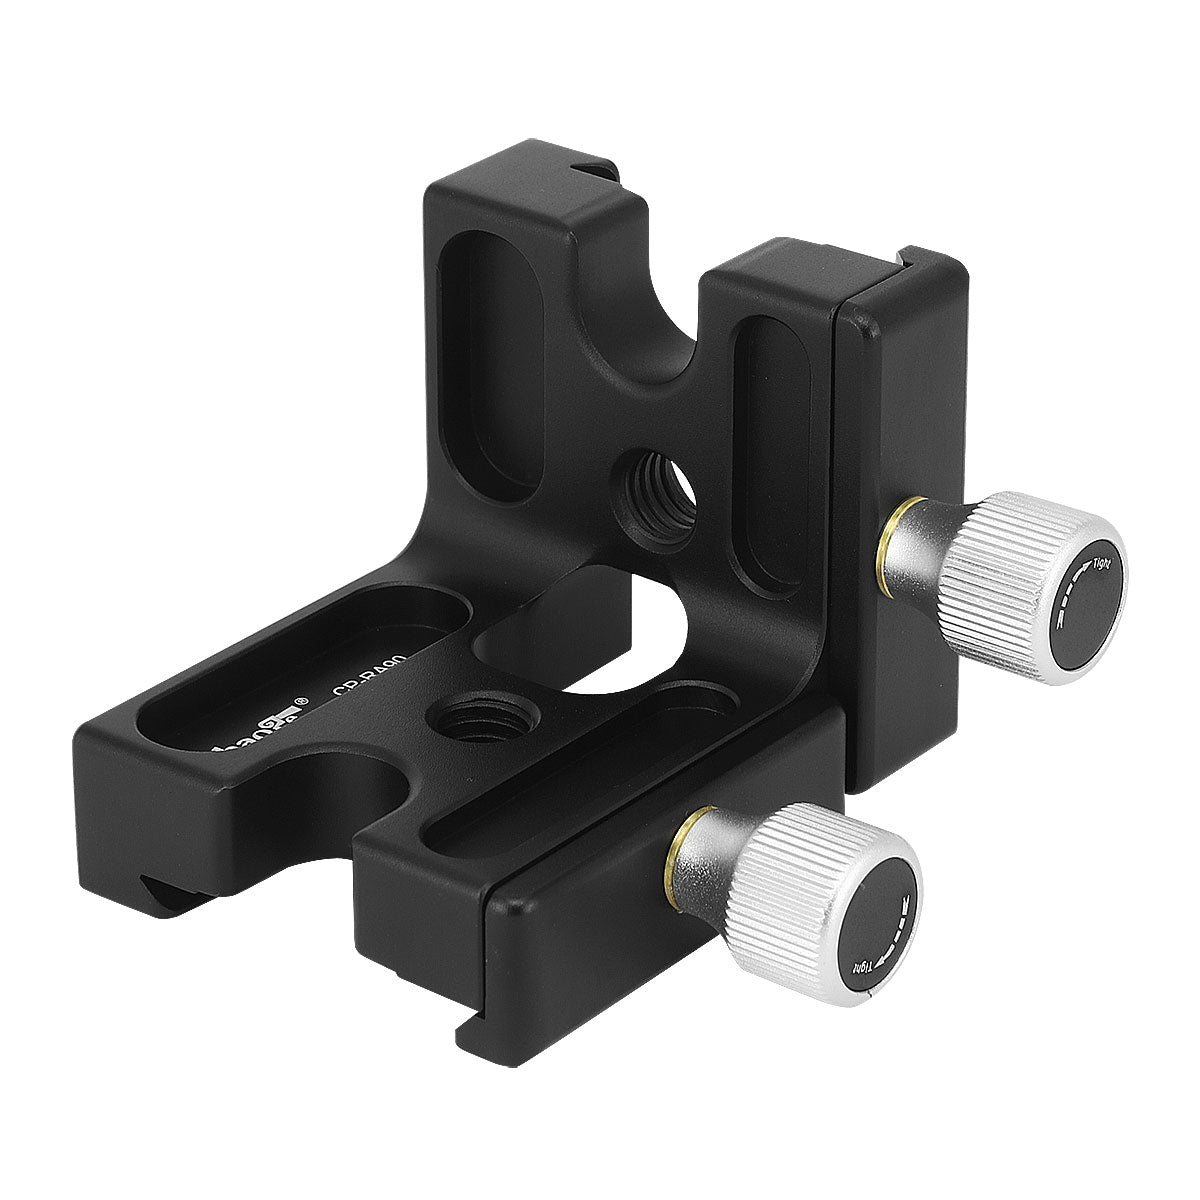 Haoge CP-RA90 Right Angle Clamp 90 Degree Double Quick Release L Clamp with 1/4 Screw Thread for Arca Swiss RRS Benro Rail Plate Nodal Slide